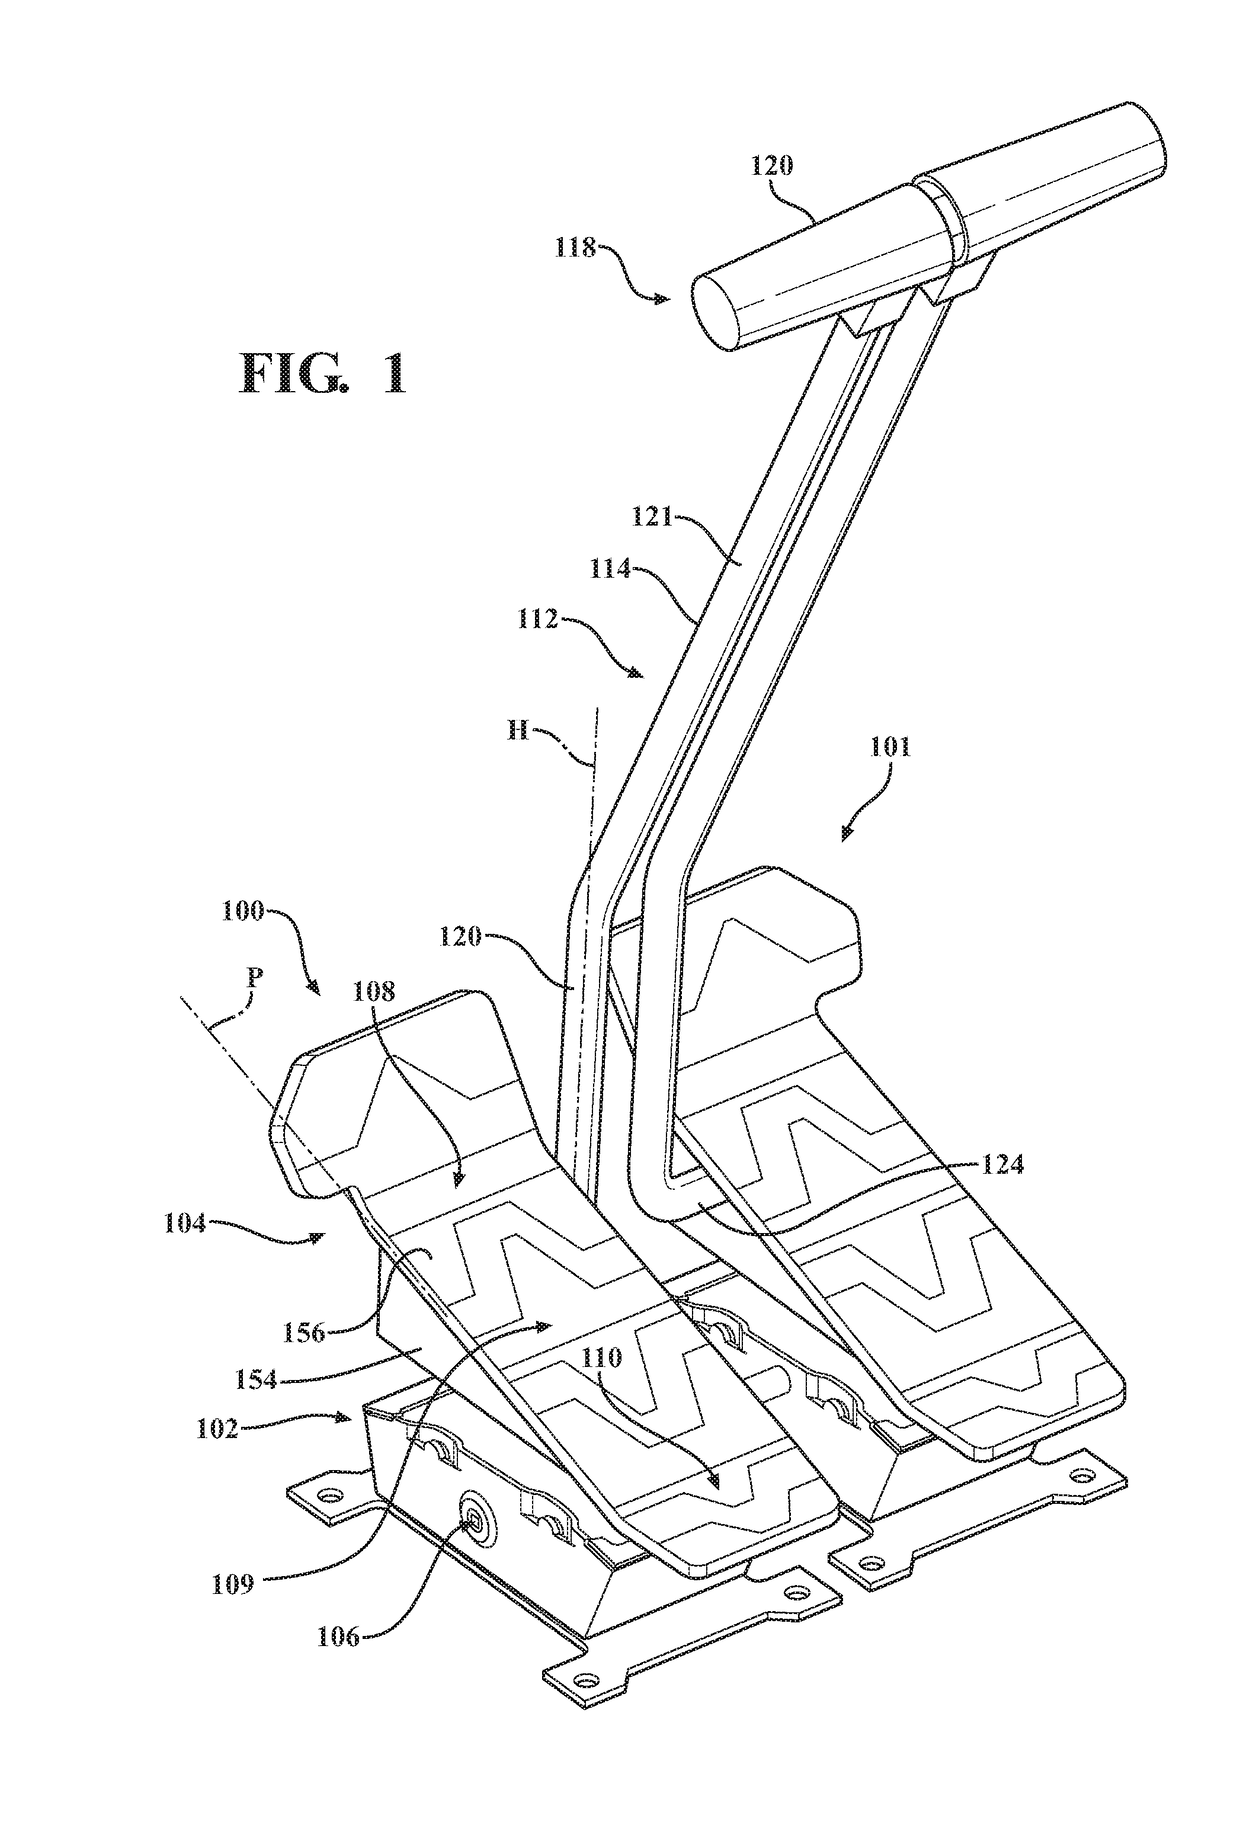 Bidirectional Pedal Assembly